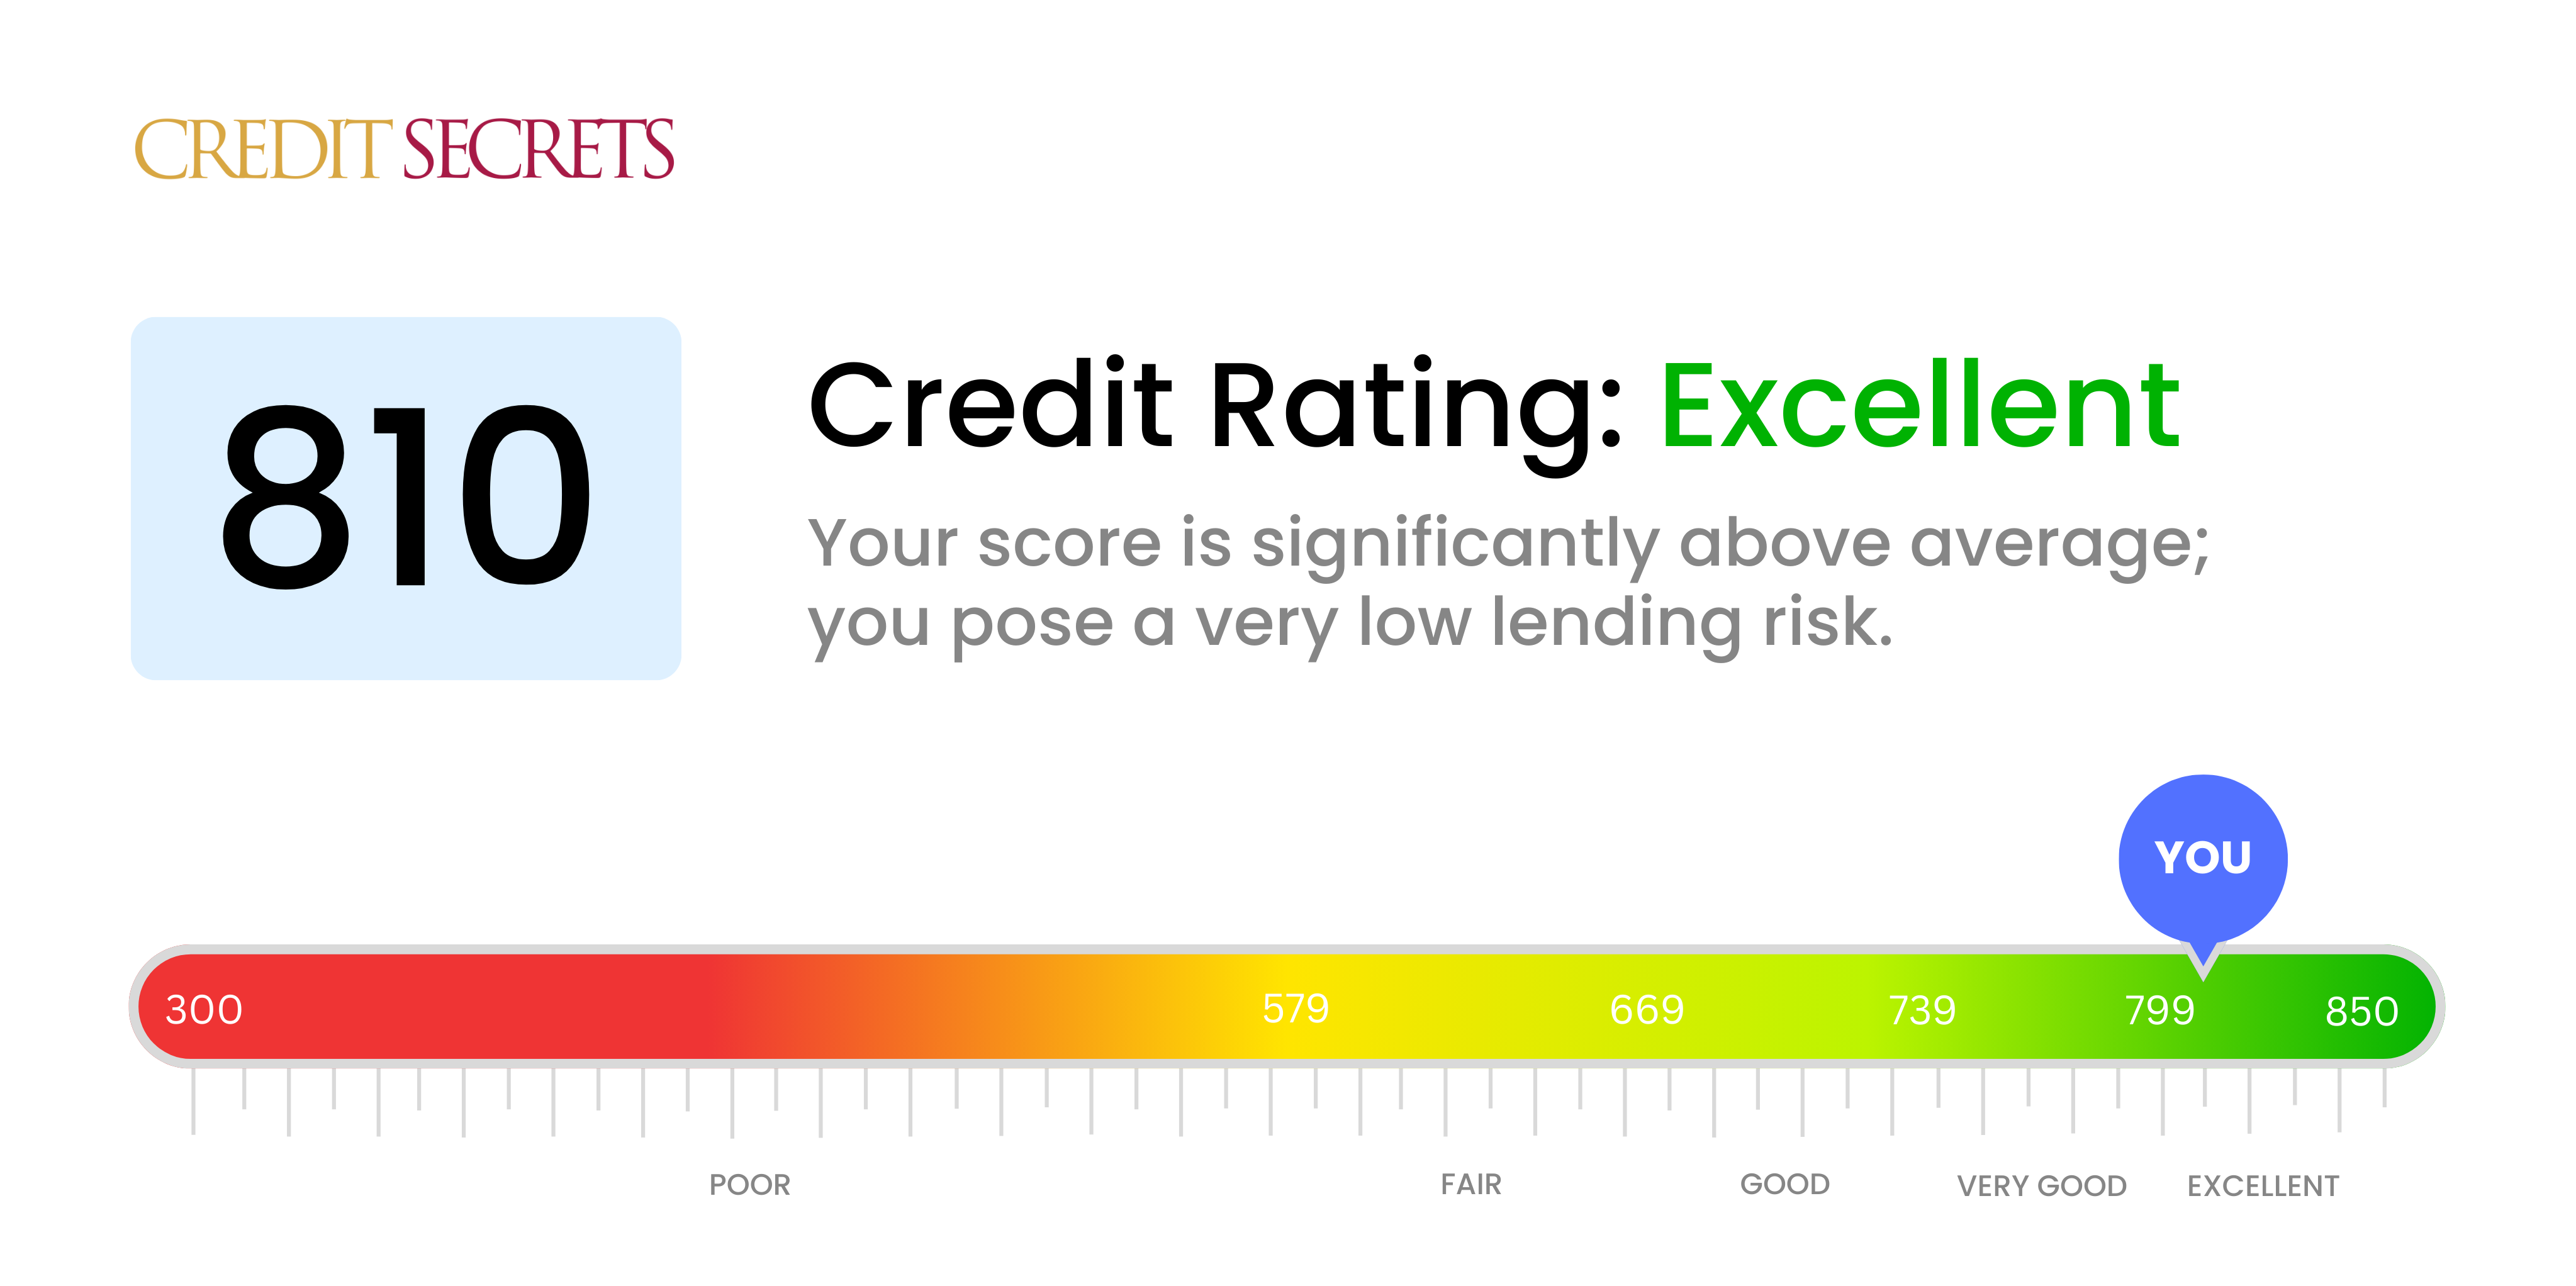 Is 810 a good credit score?